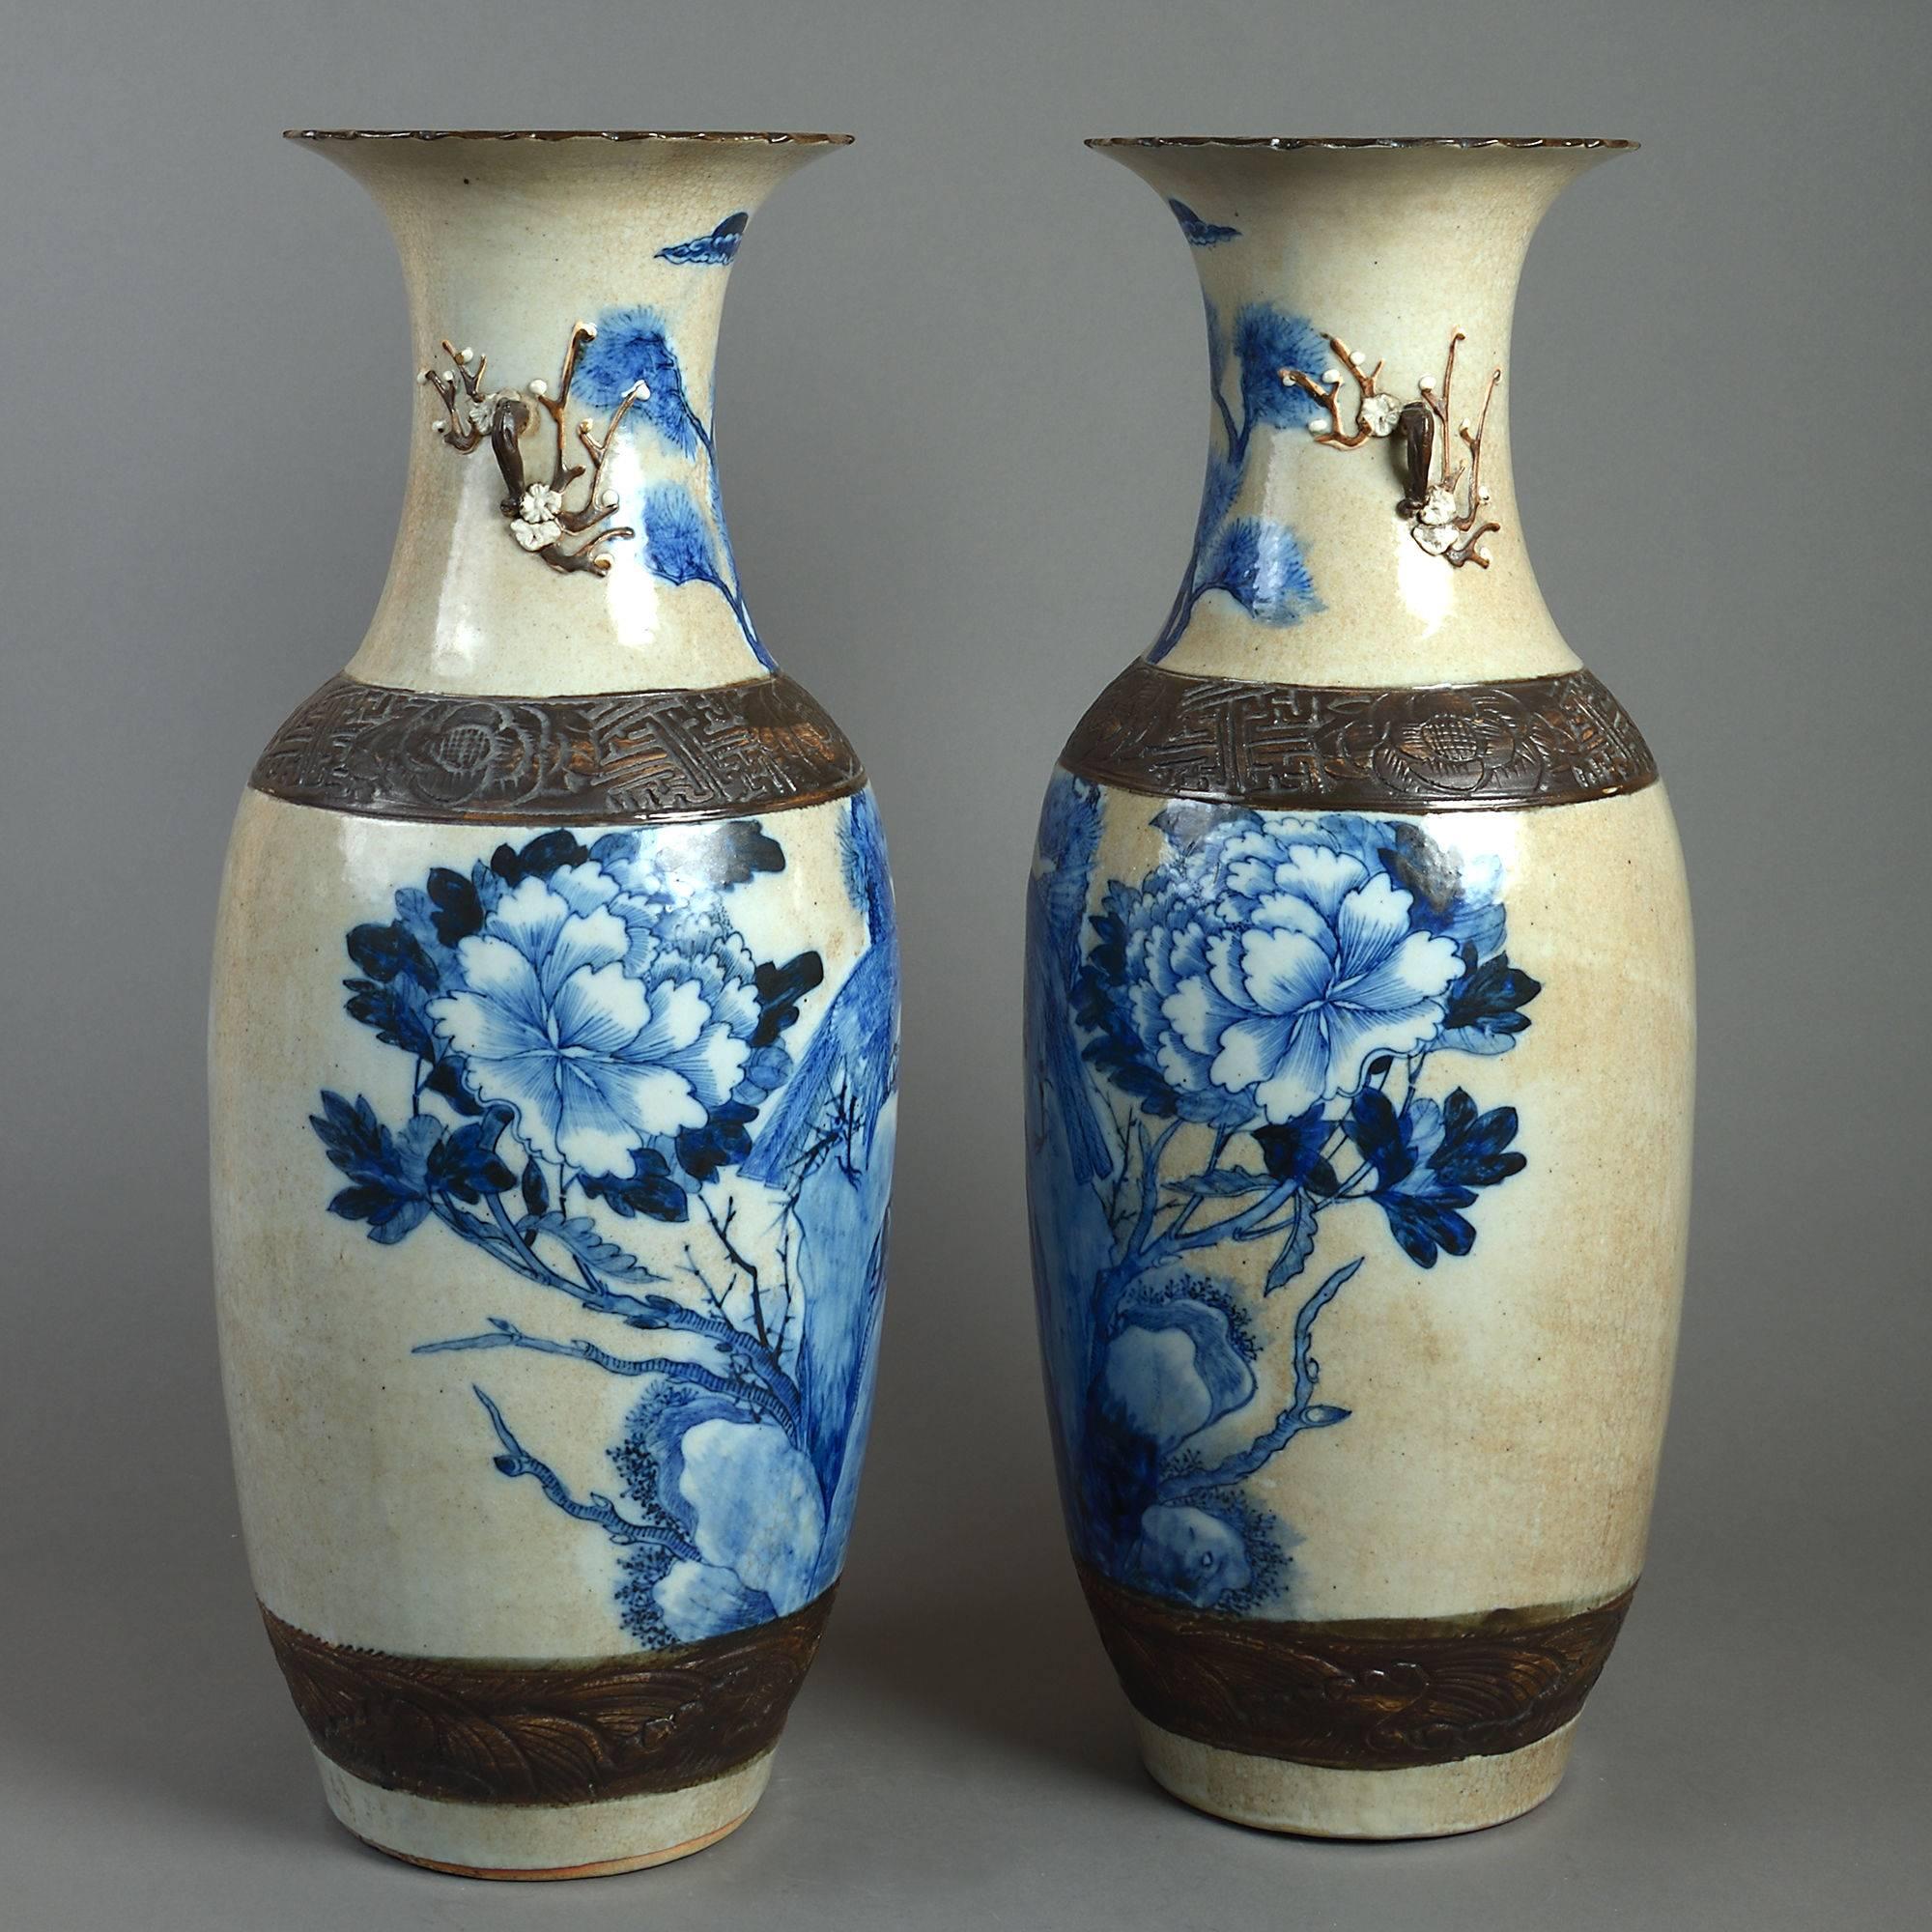 A good large-scale pair of late 19th century Qing dynasty porcelain vases, the cafe au lait crackle glazed bodies with blue glazed decoration of mythological beasts, birds, rocks, flowers and foliage.